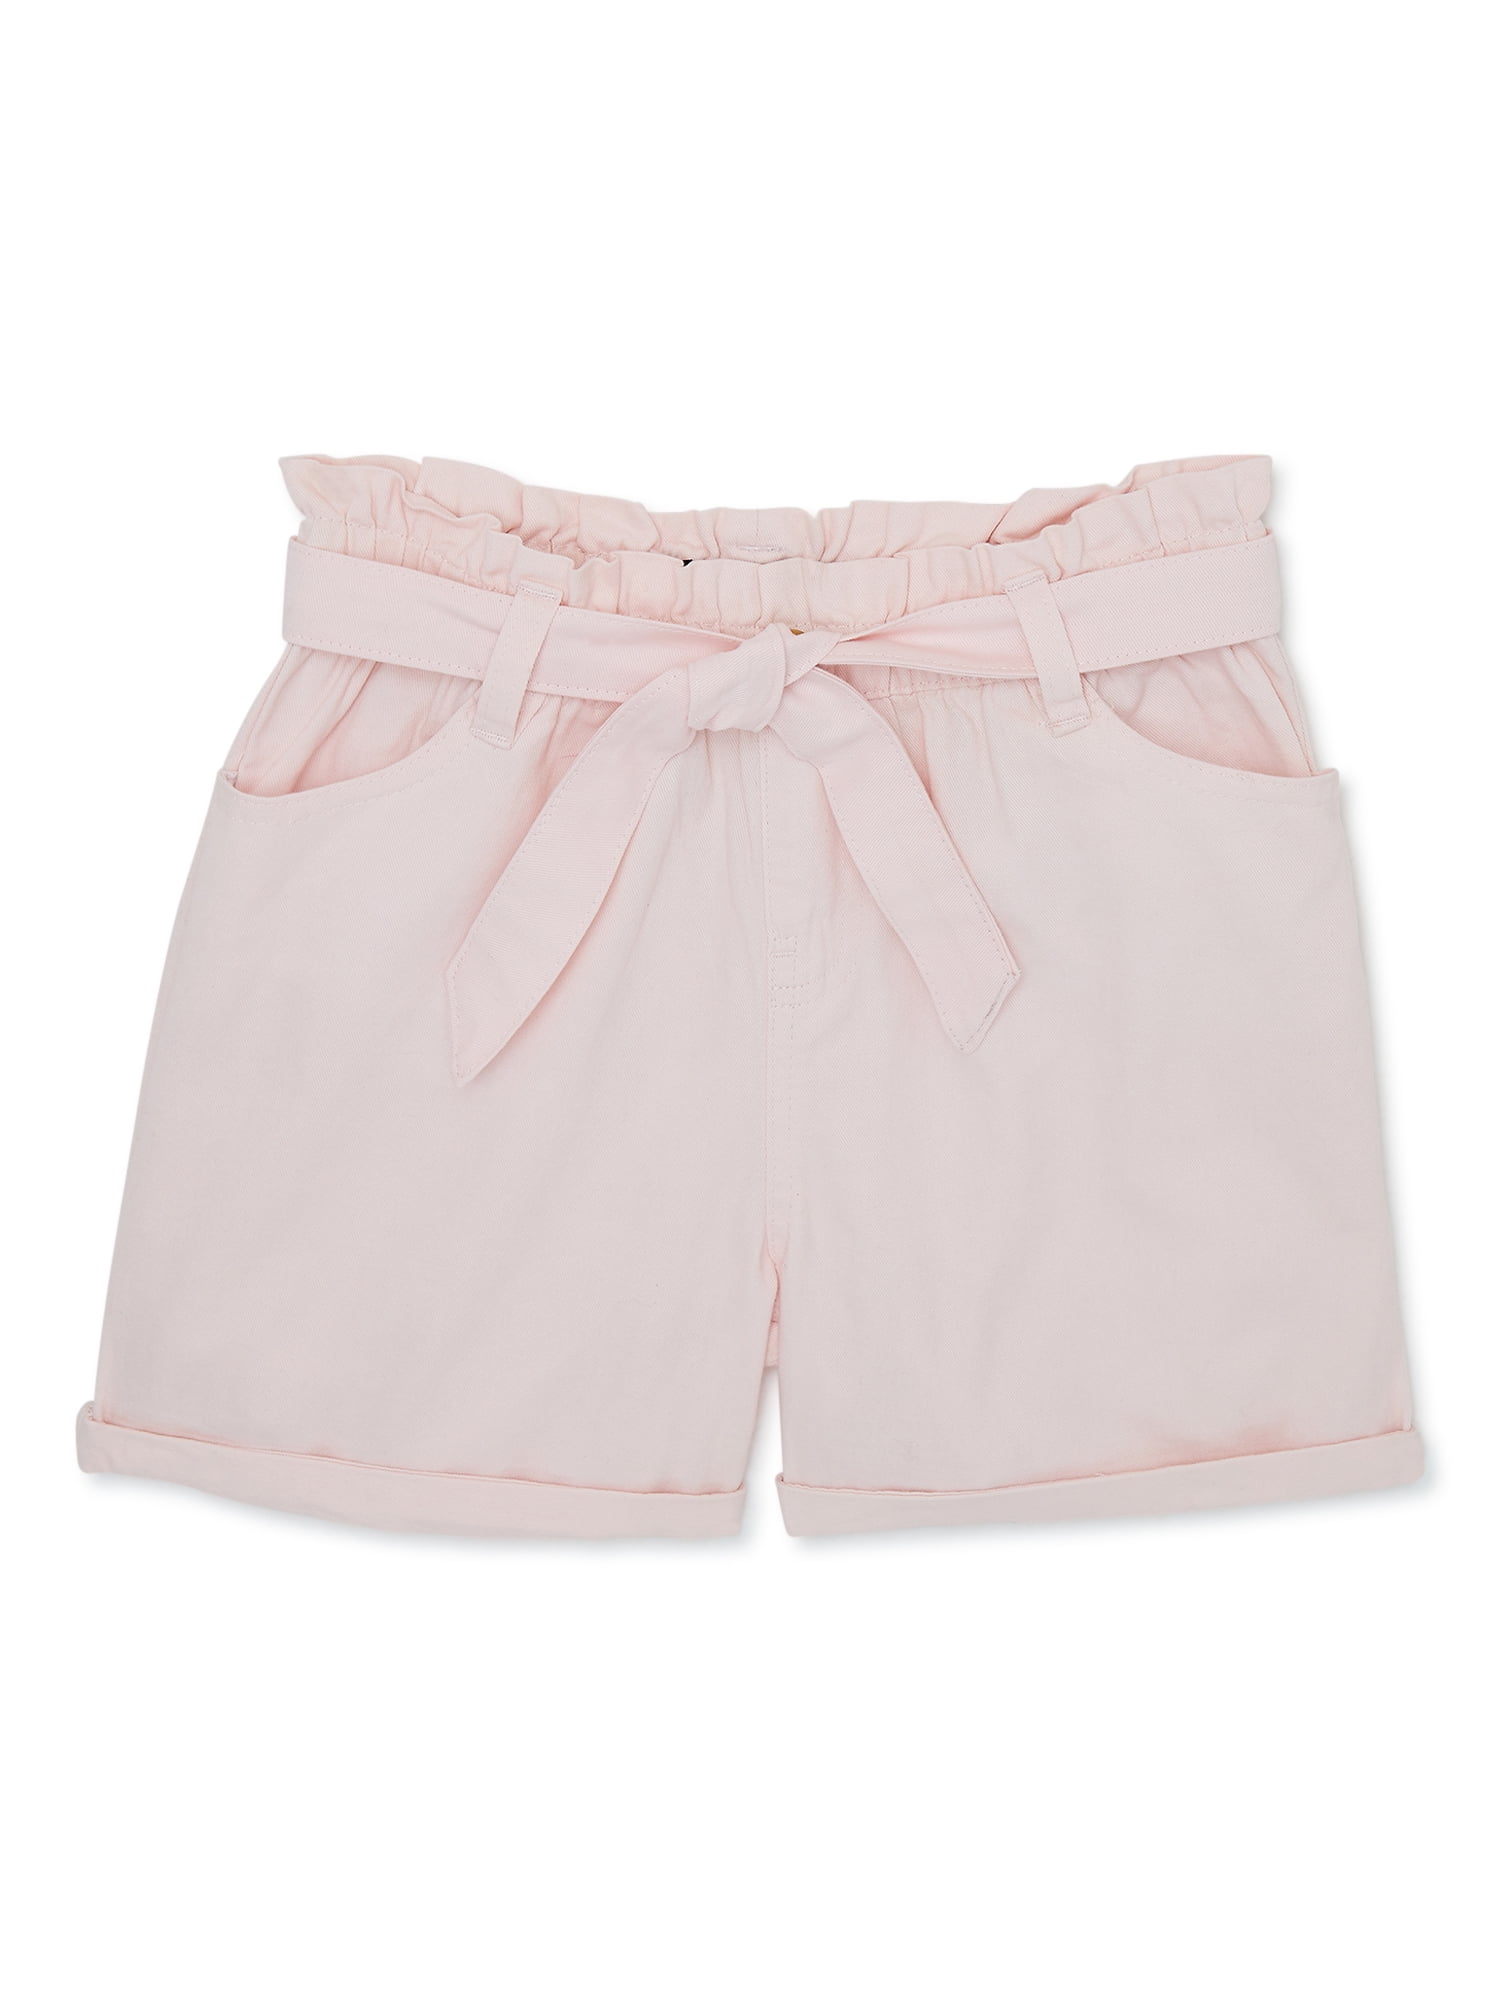 Star Ride Girls Paper Bag Pull On Shorts, Sizes 4-16 